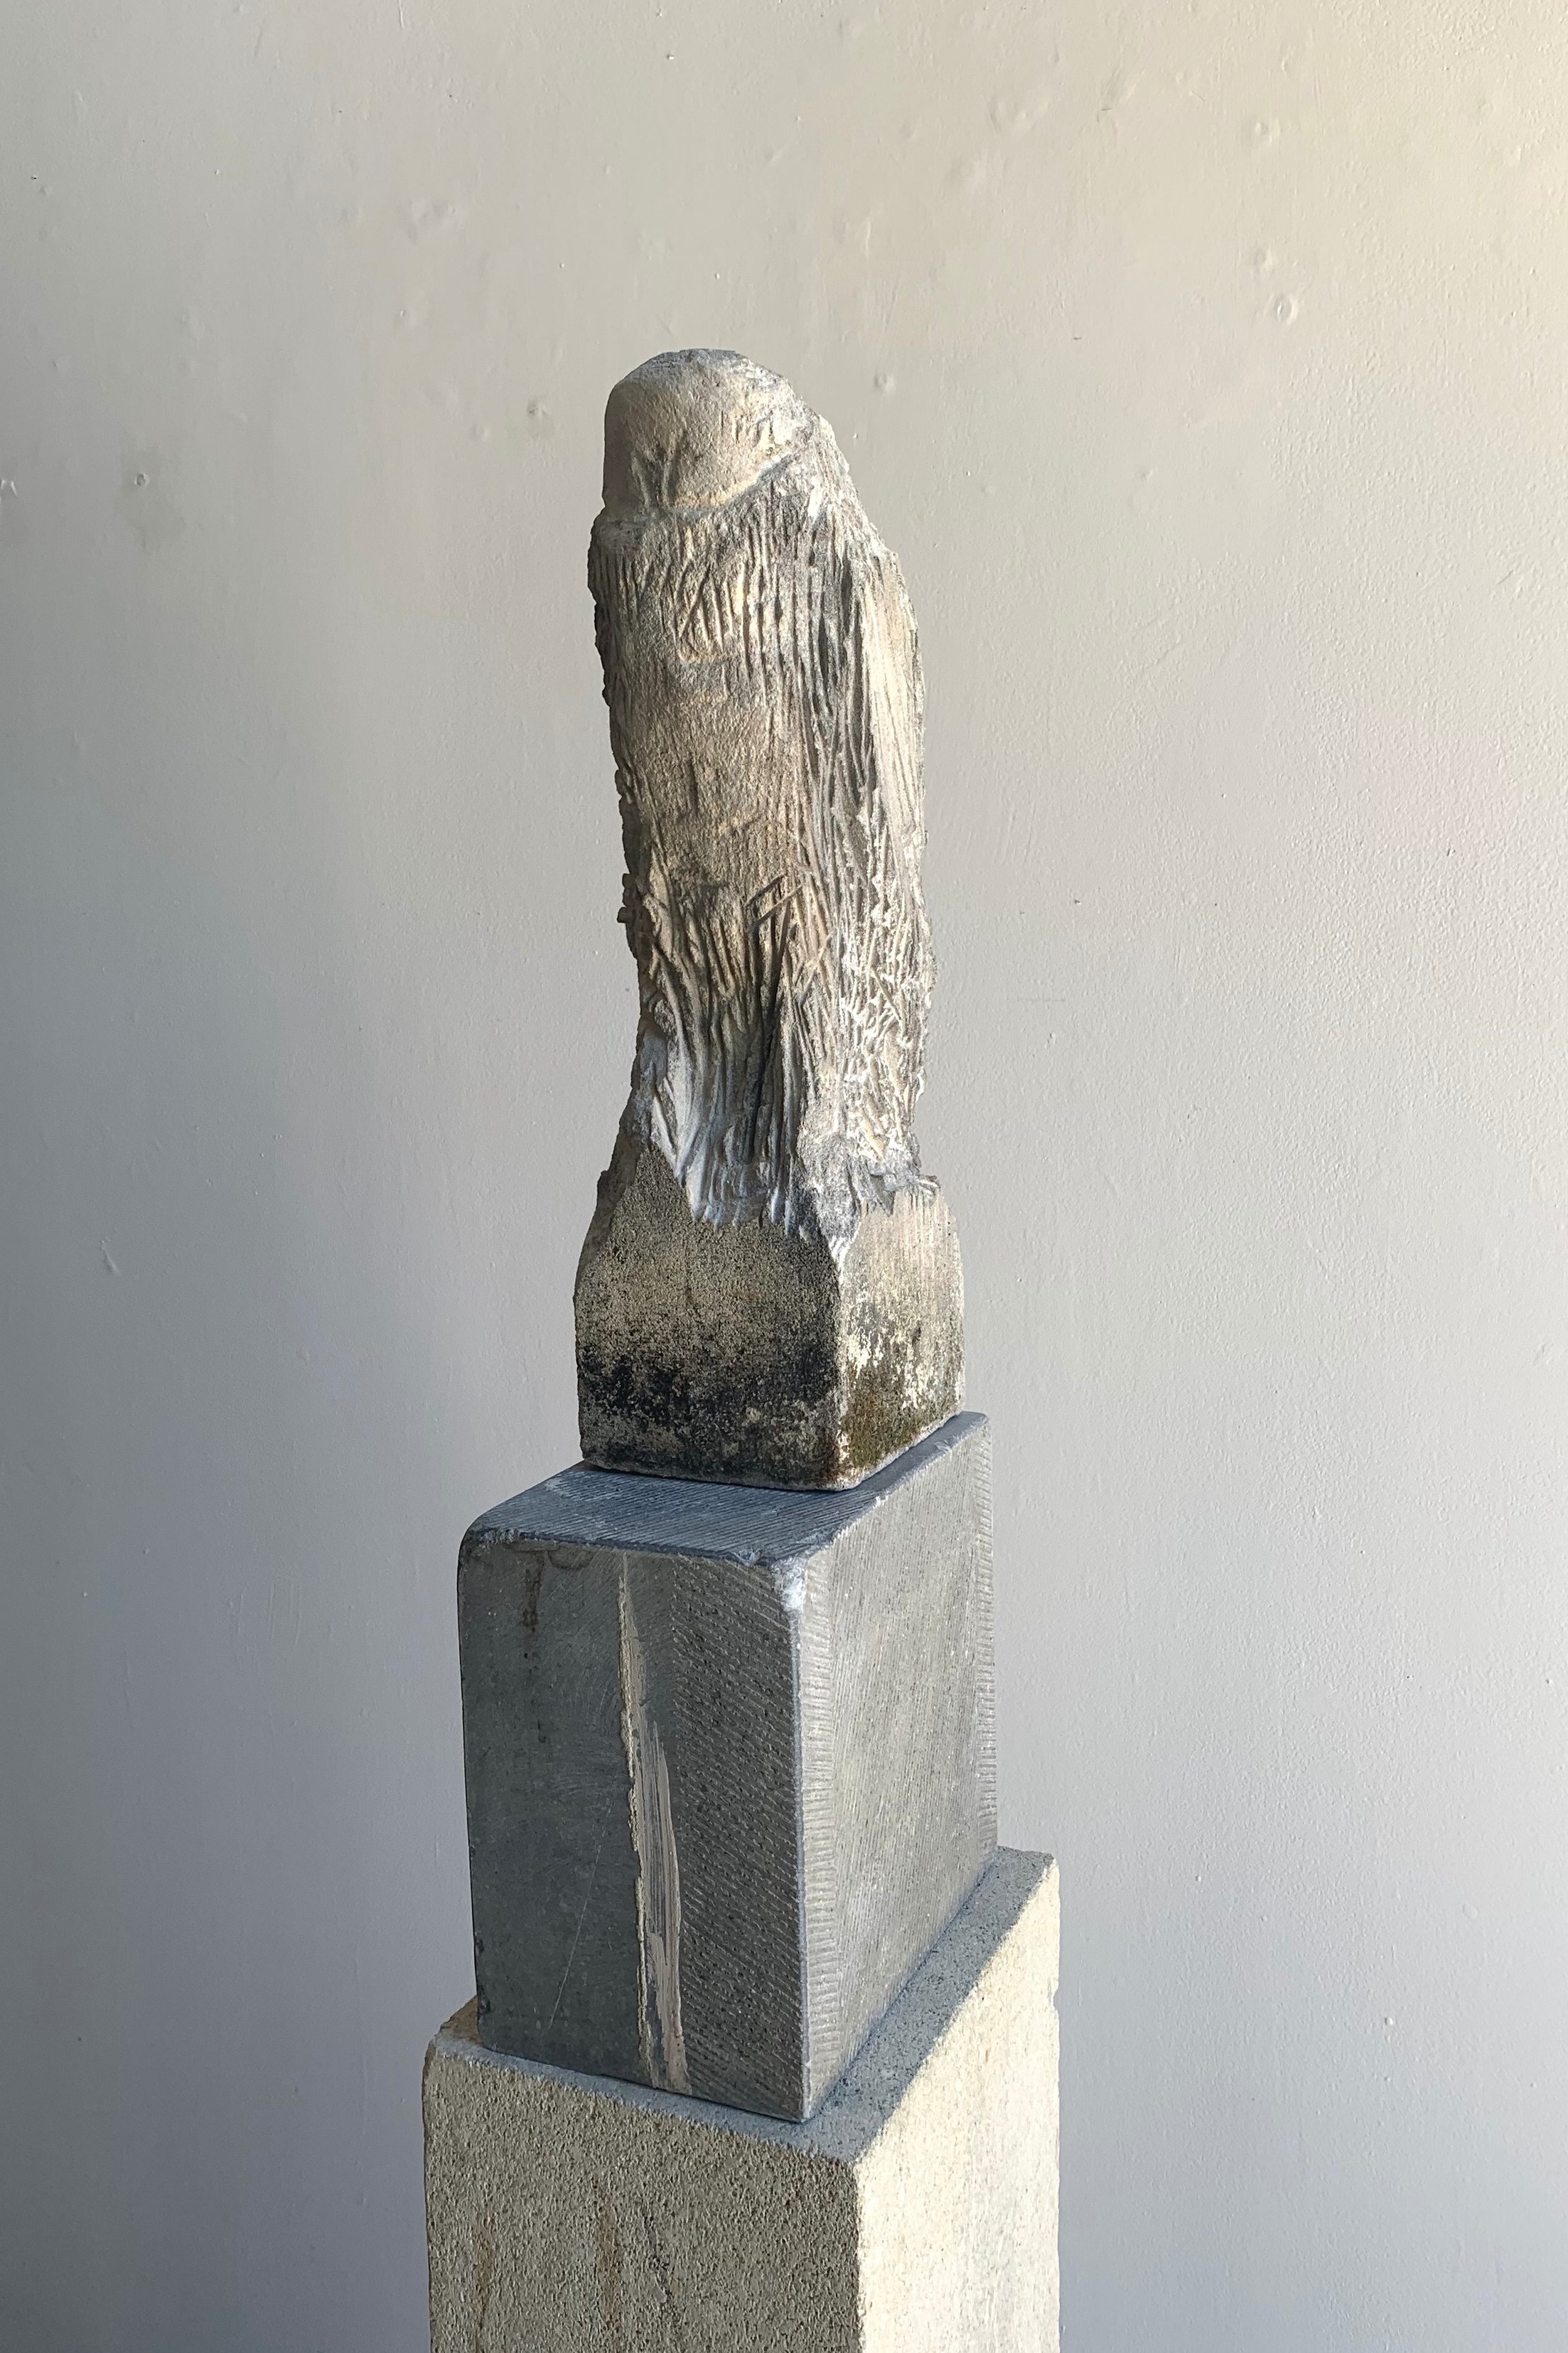  “Night Owl,” 2019  Limestone and pigment  63 x 8 x 10 inches 